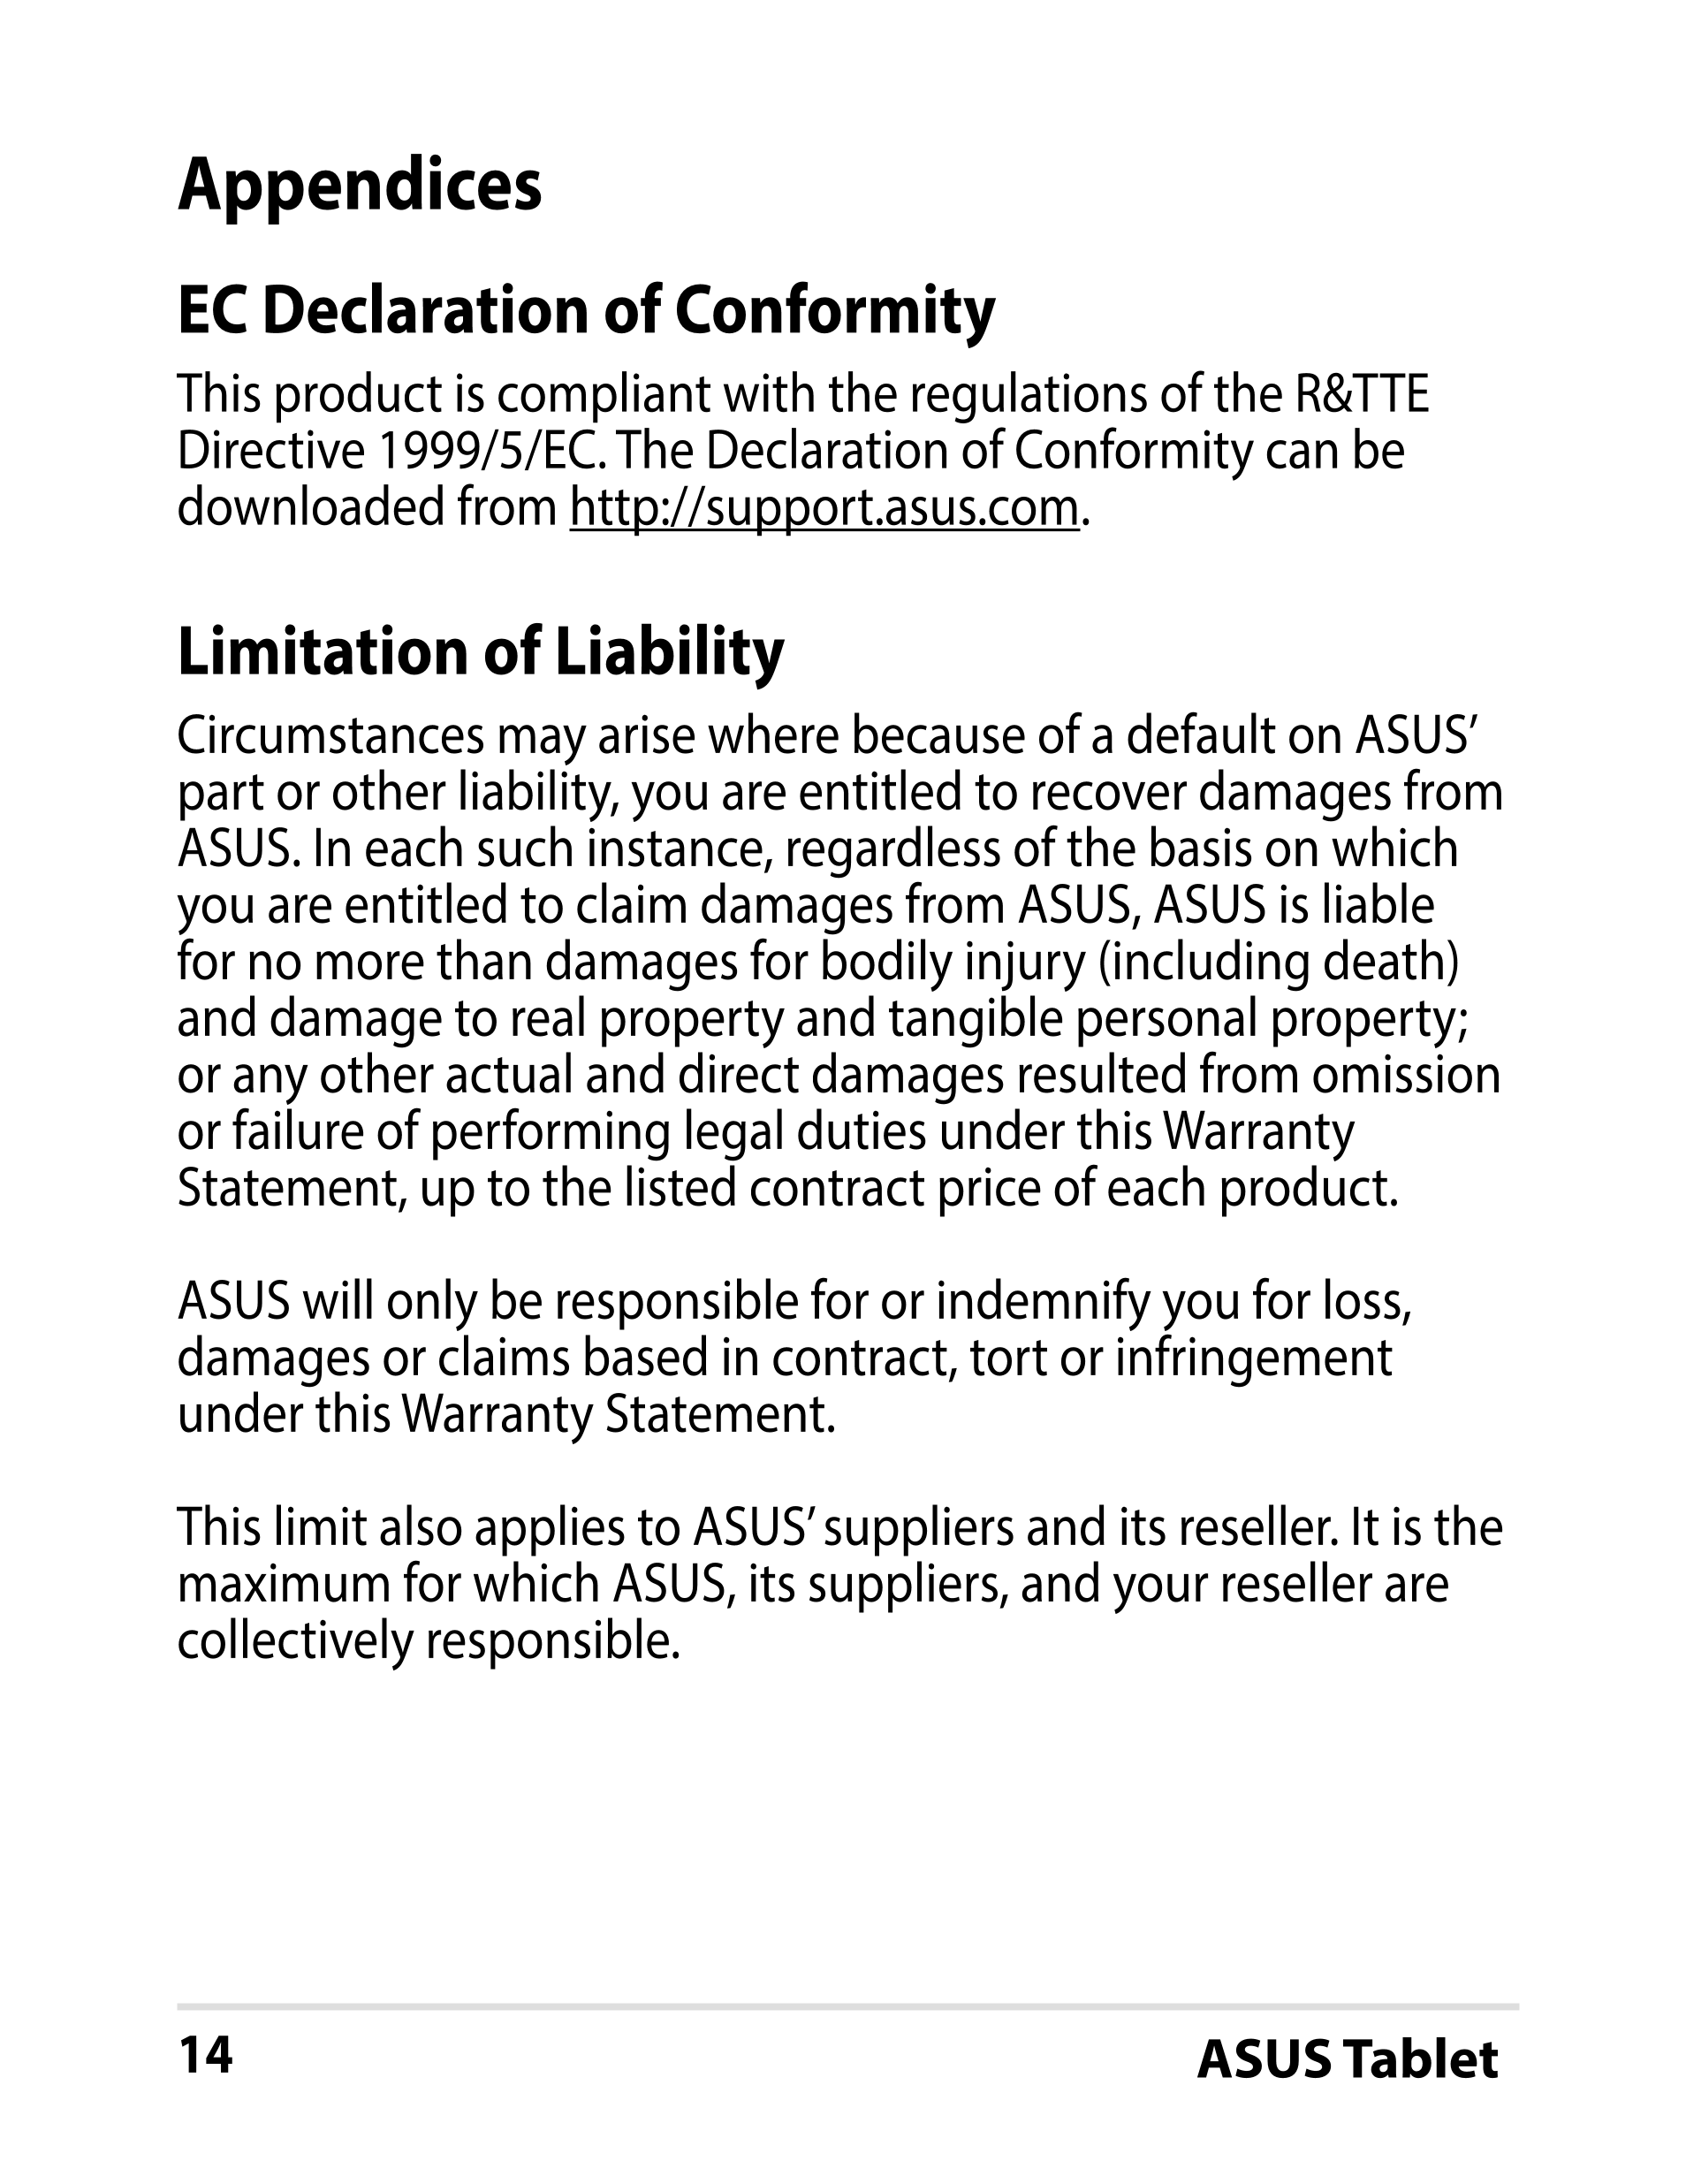 Appendices
EC Declaration of Conformity
This product is compliant with the regulations of the R&TTE 
Directive 1999/5/EC. The De